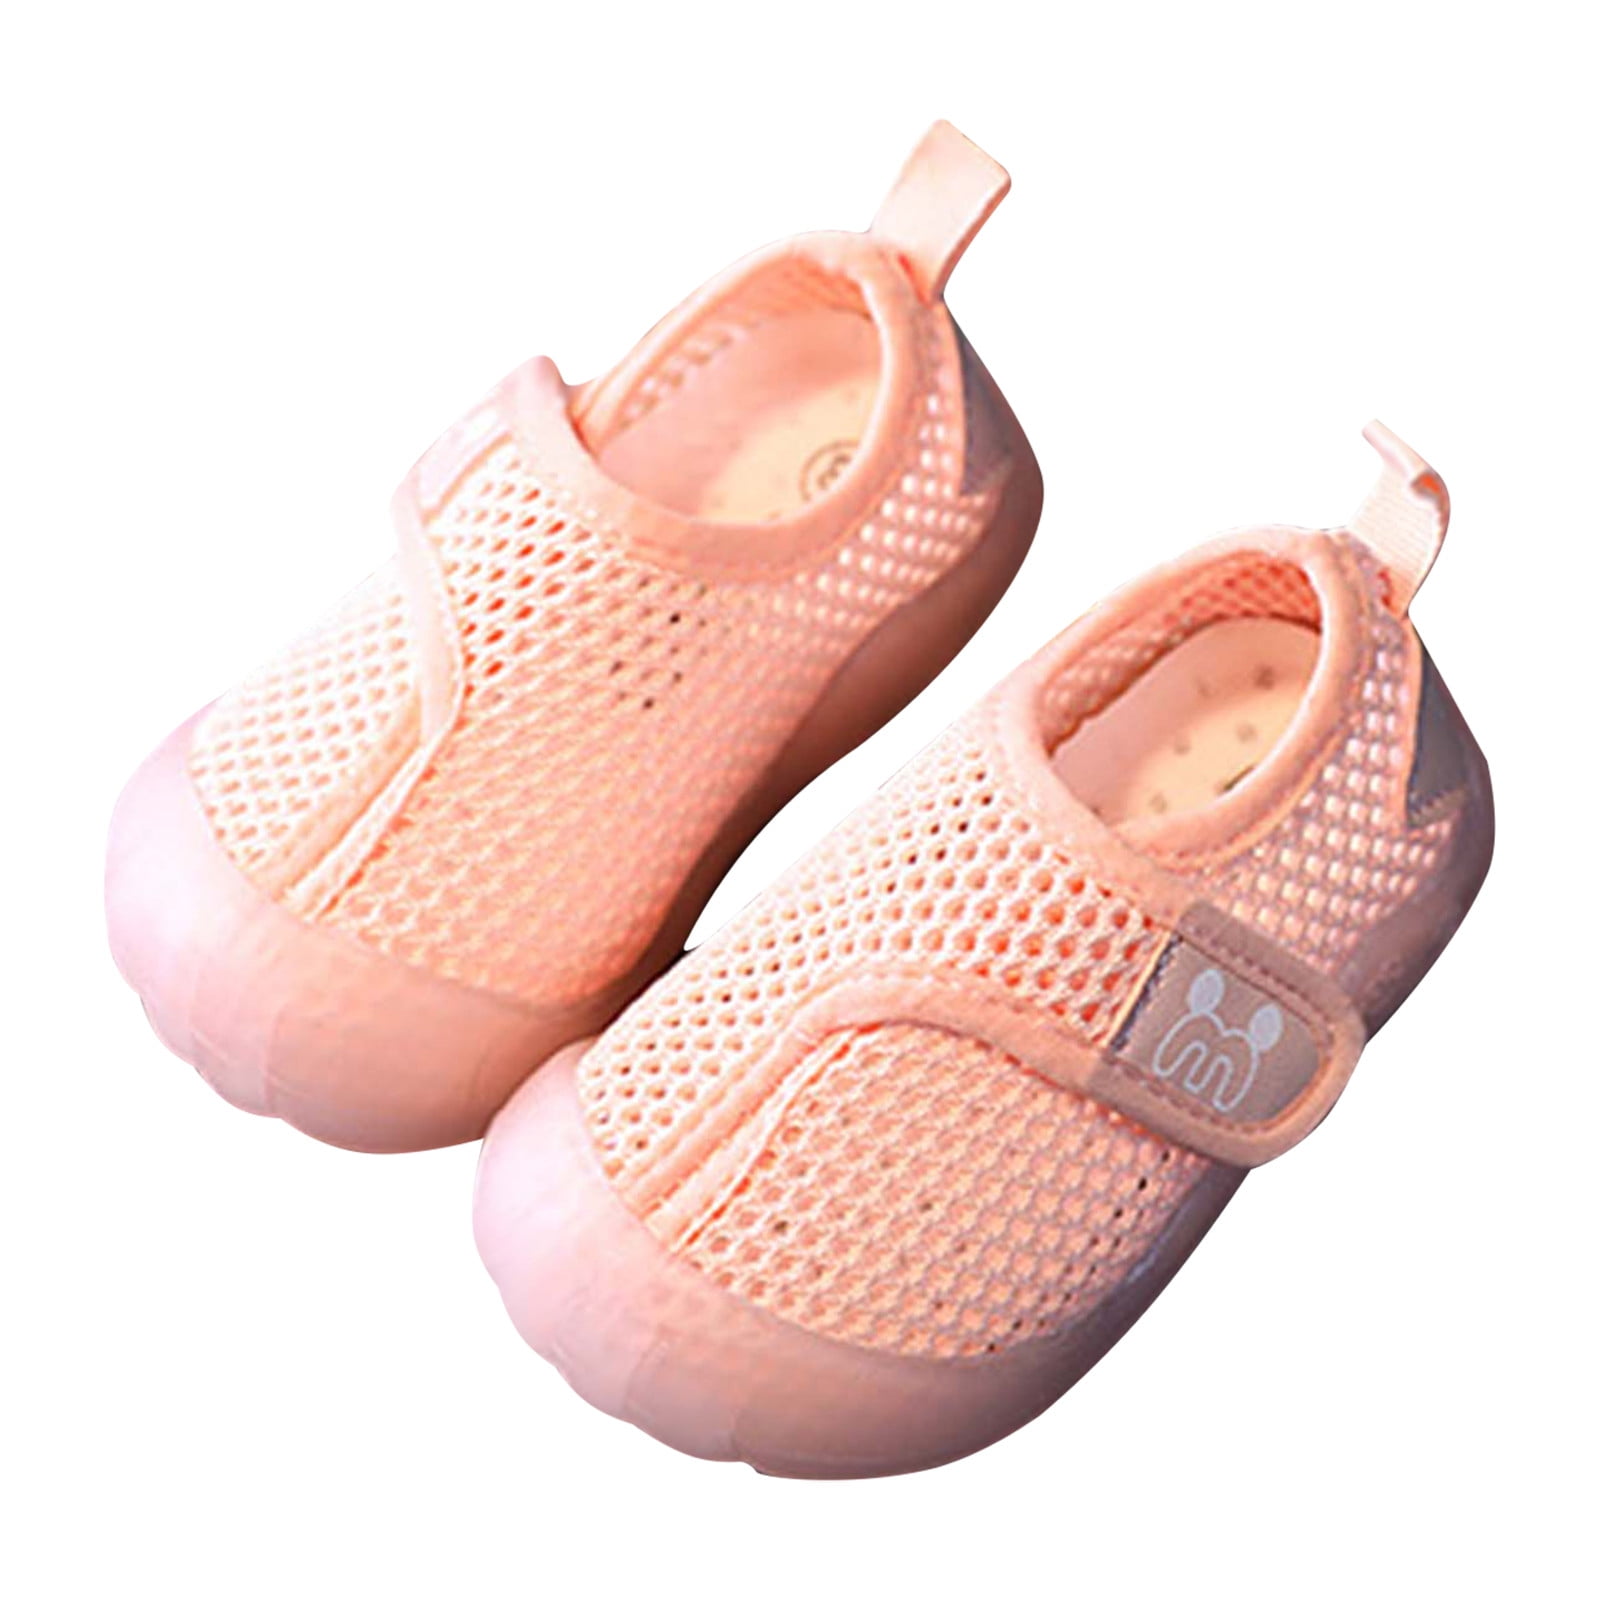 Lanhui Baby Shoes Anti-Slip Soft Sole Sneaker Toddler Colorful Canvas Shoes 